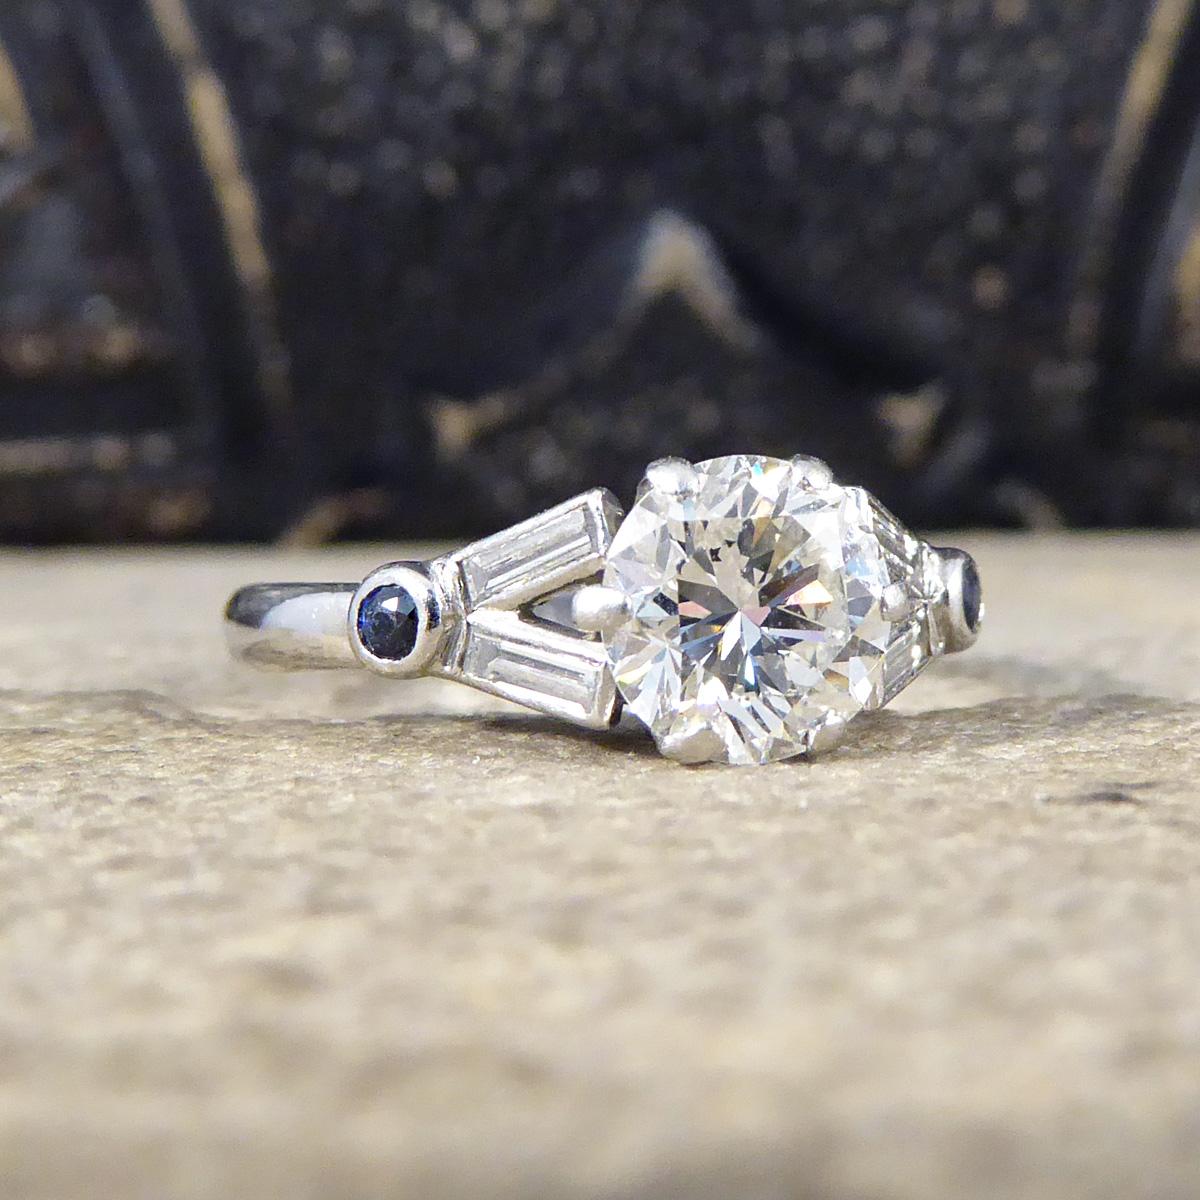 This ring would make the perfect engagement ring for anyone who like an 1920's pre loved piece. It is Early Generation Brilliant Cut Diamond weighing 1.10ct in a 6 claw setting. Showing its classic Art Deco style with Baguette Cut Diamond creating a